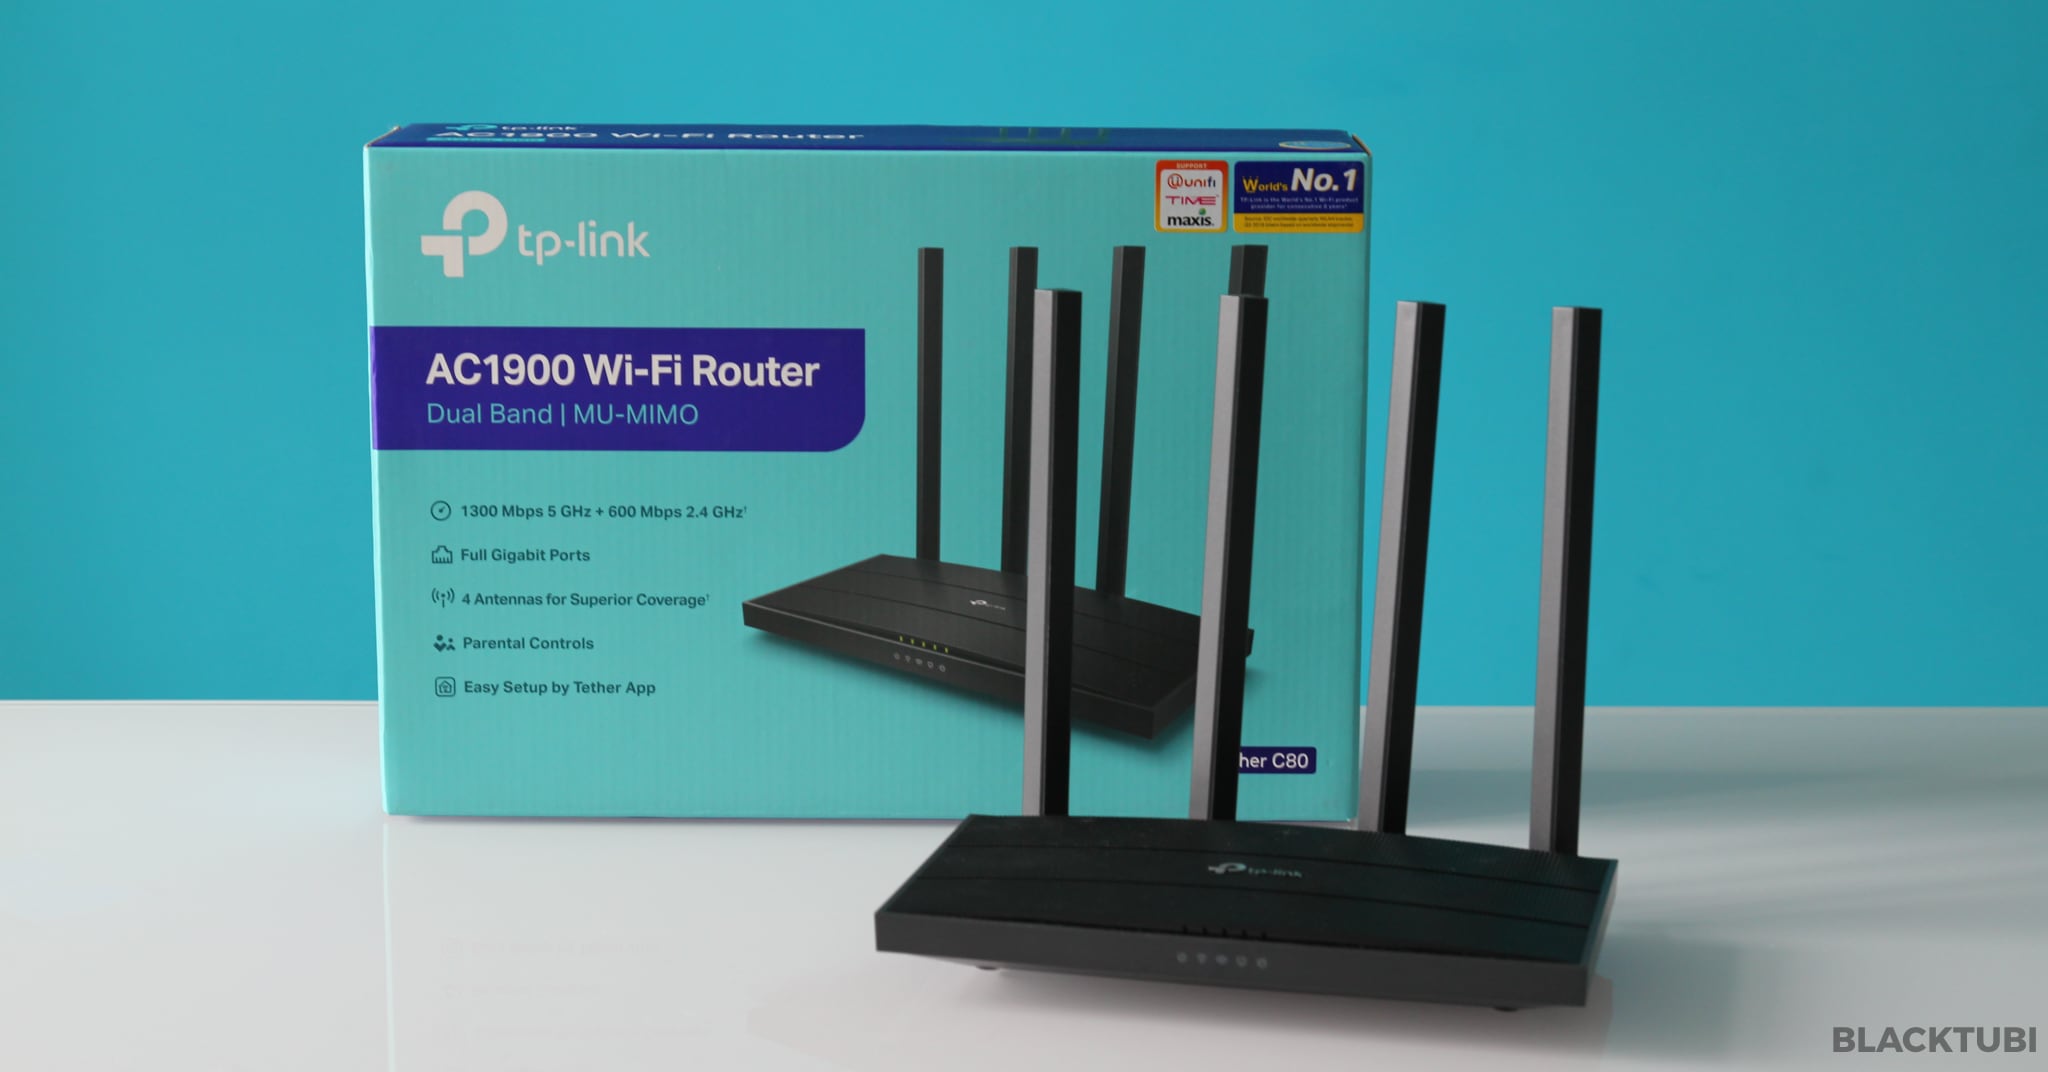 TP-Link Archer A6 AC1200 Router Review: Good Performance On a Budget